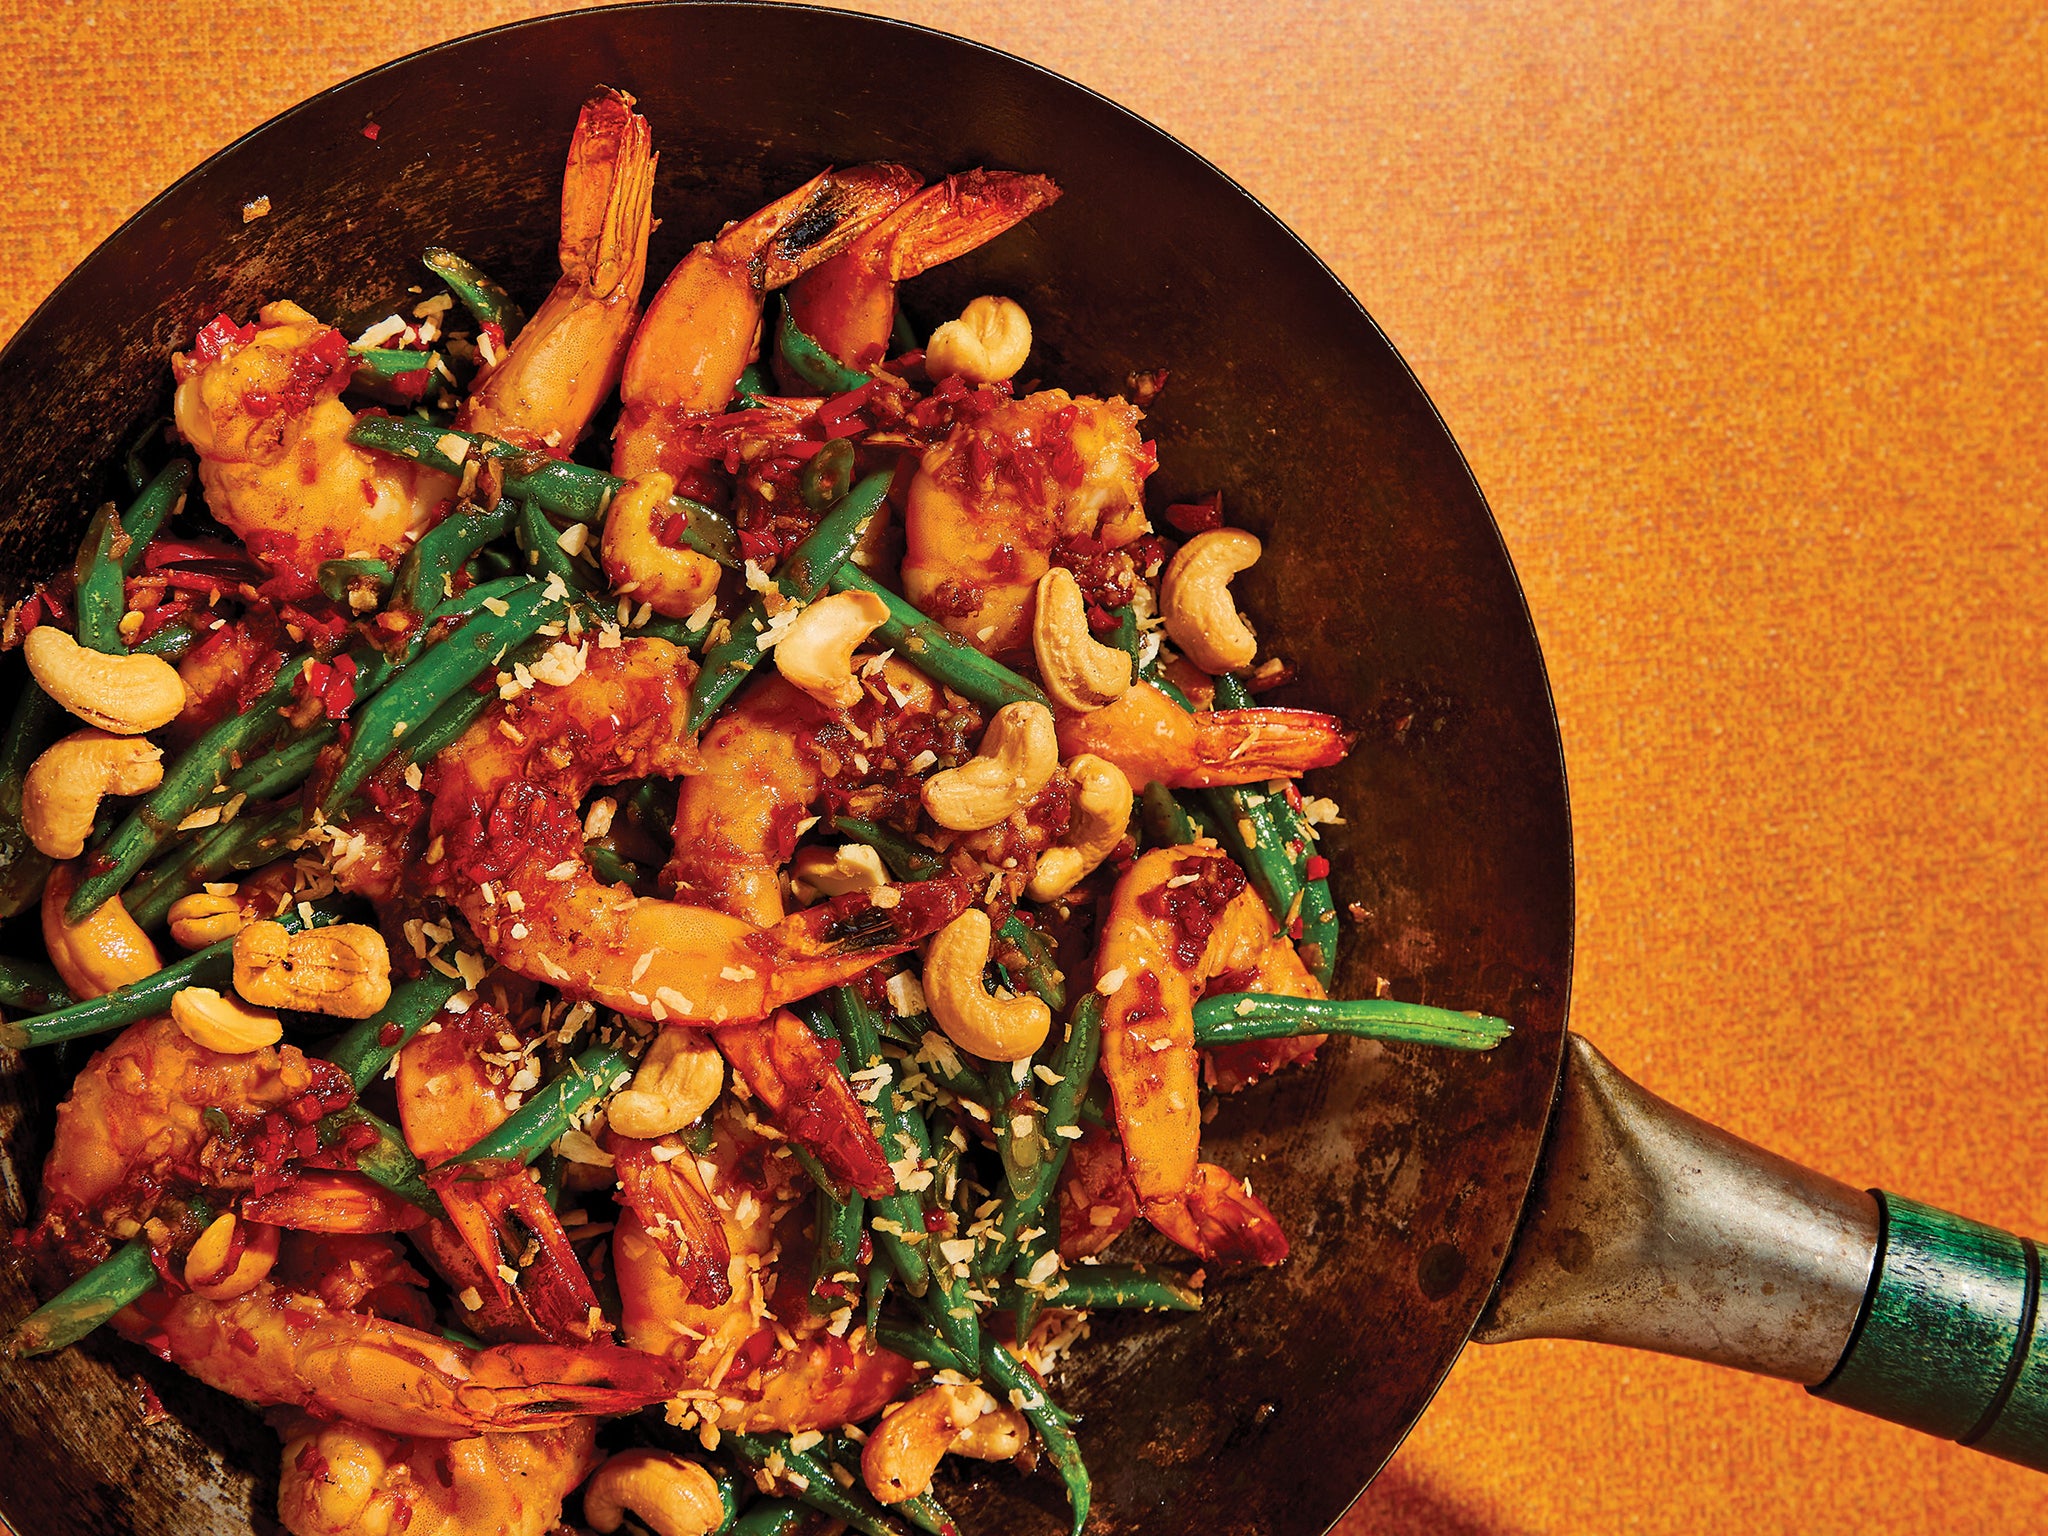 Make this dish vegan by swapping out prawns for tofu or tempeh